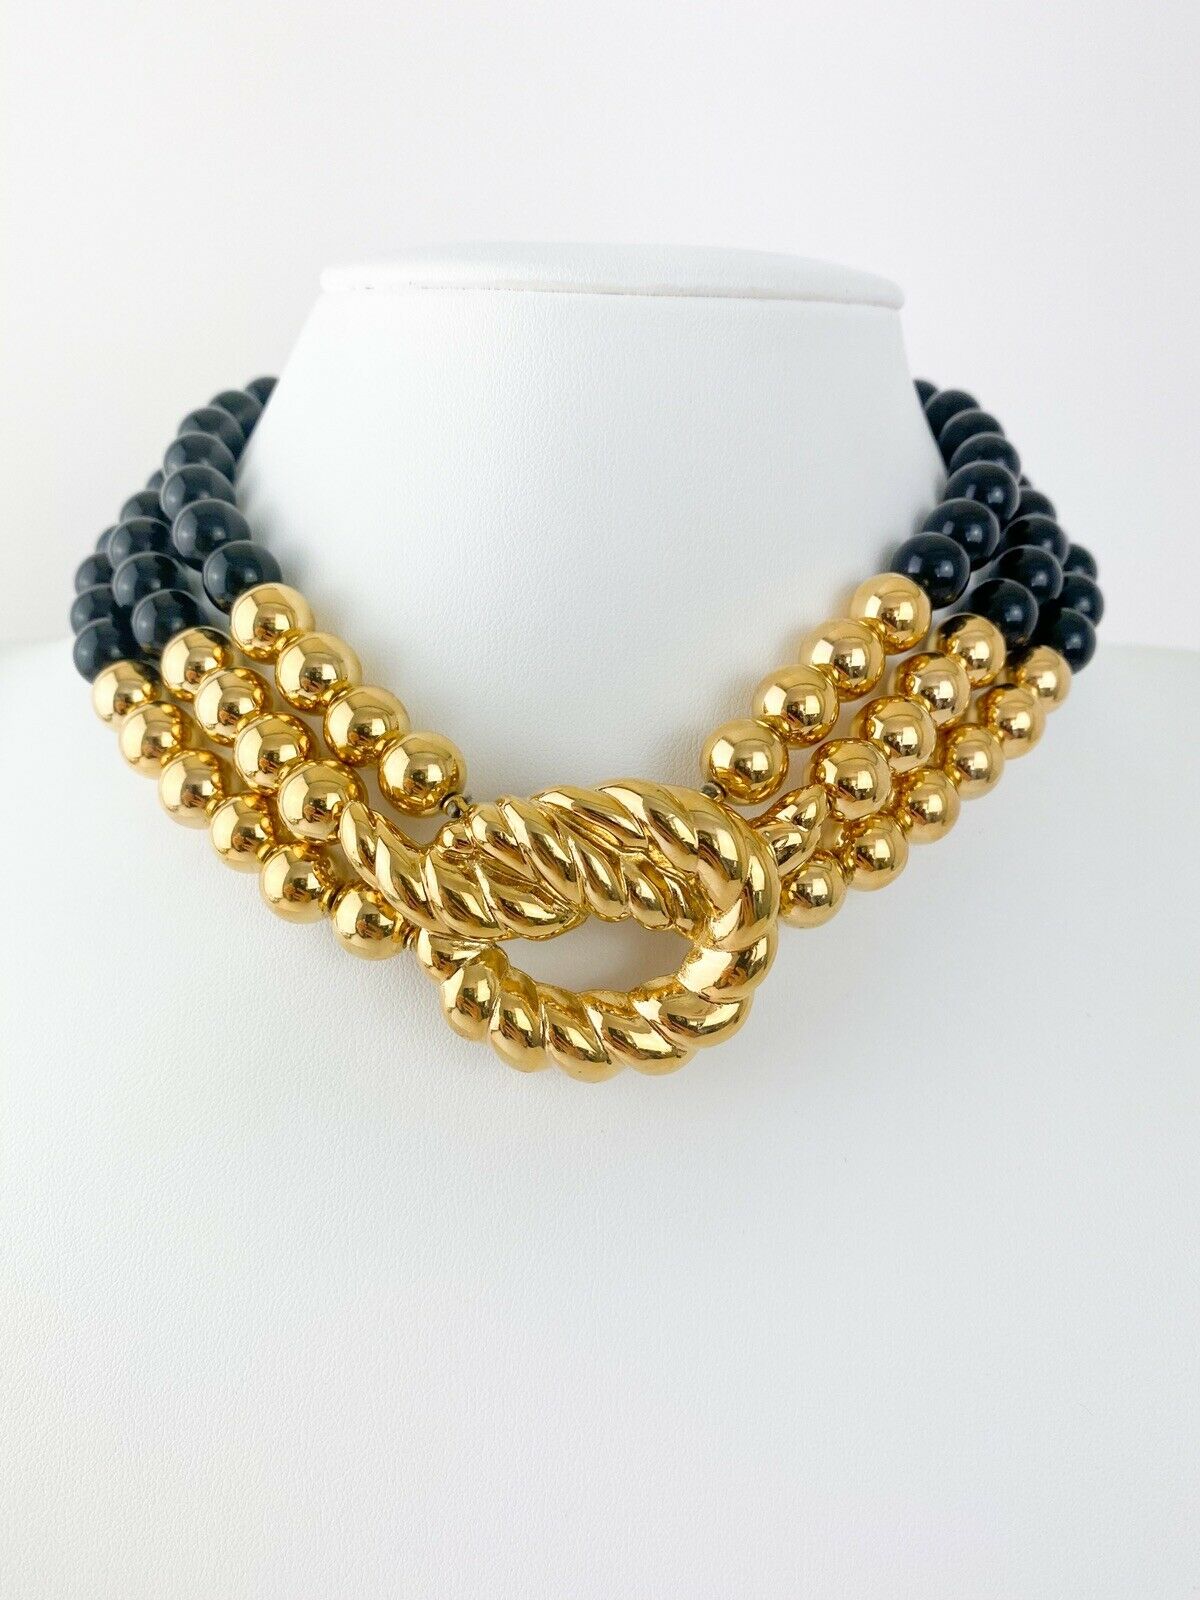 【SOLD OUT】Bijoux Givenchy Paris New York Vintage Multi-strand Beaded Necklace Black